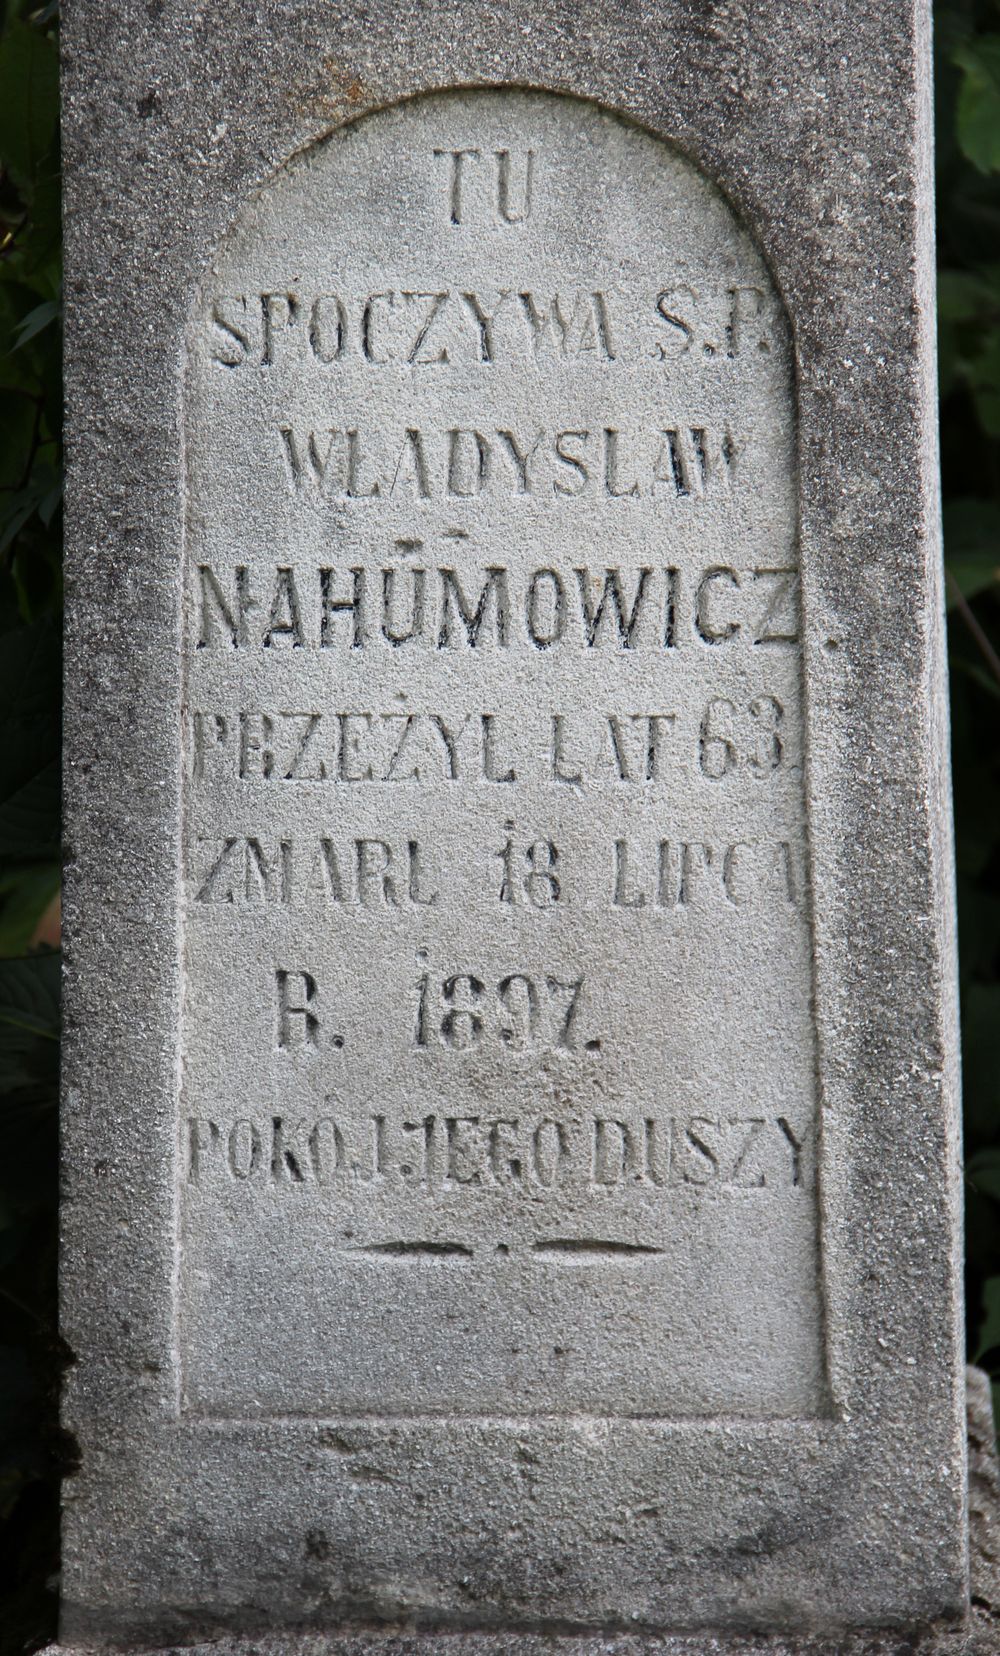 Fragment of the tombstone of Wladyslaw Nahumovich, Ternopil cemetery, state of 2016